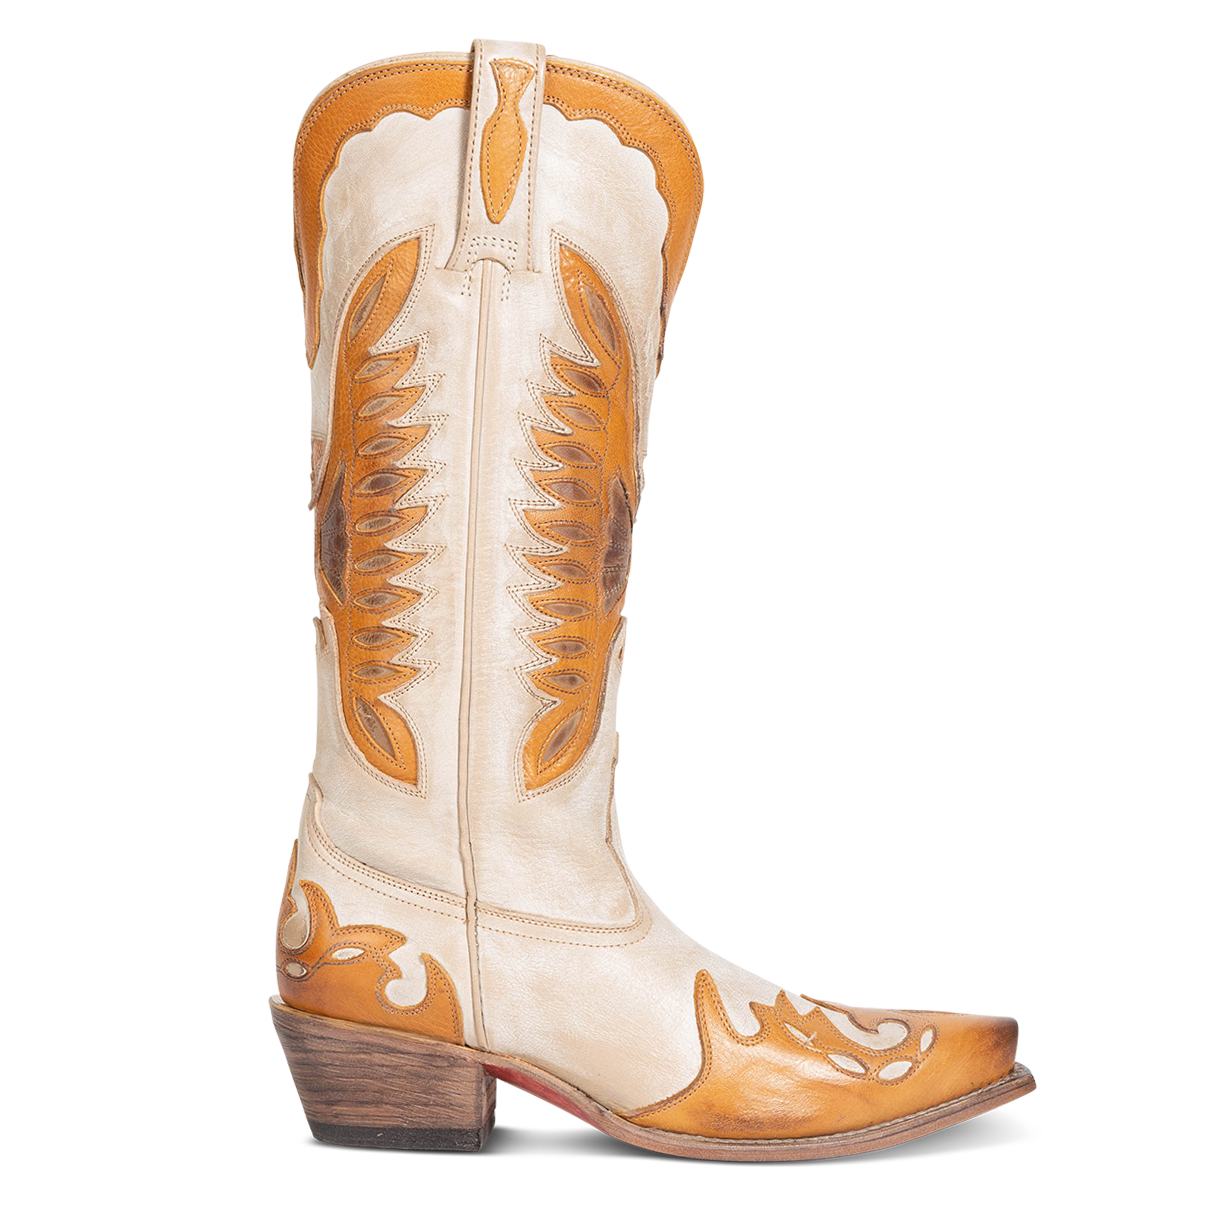 FREEBIRD women's Willie beige multi leather western boot with textured design, stitch detailing, and snip toe construction